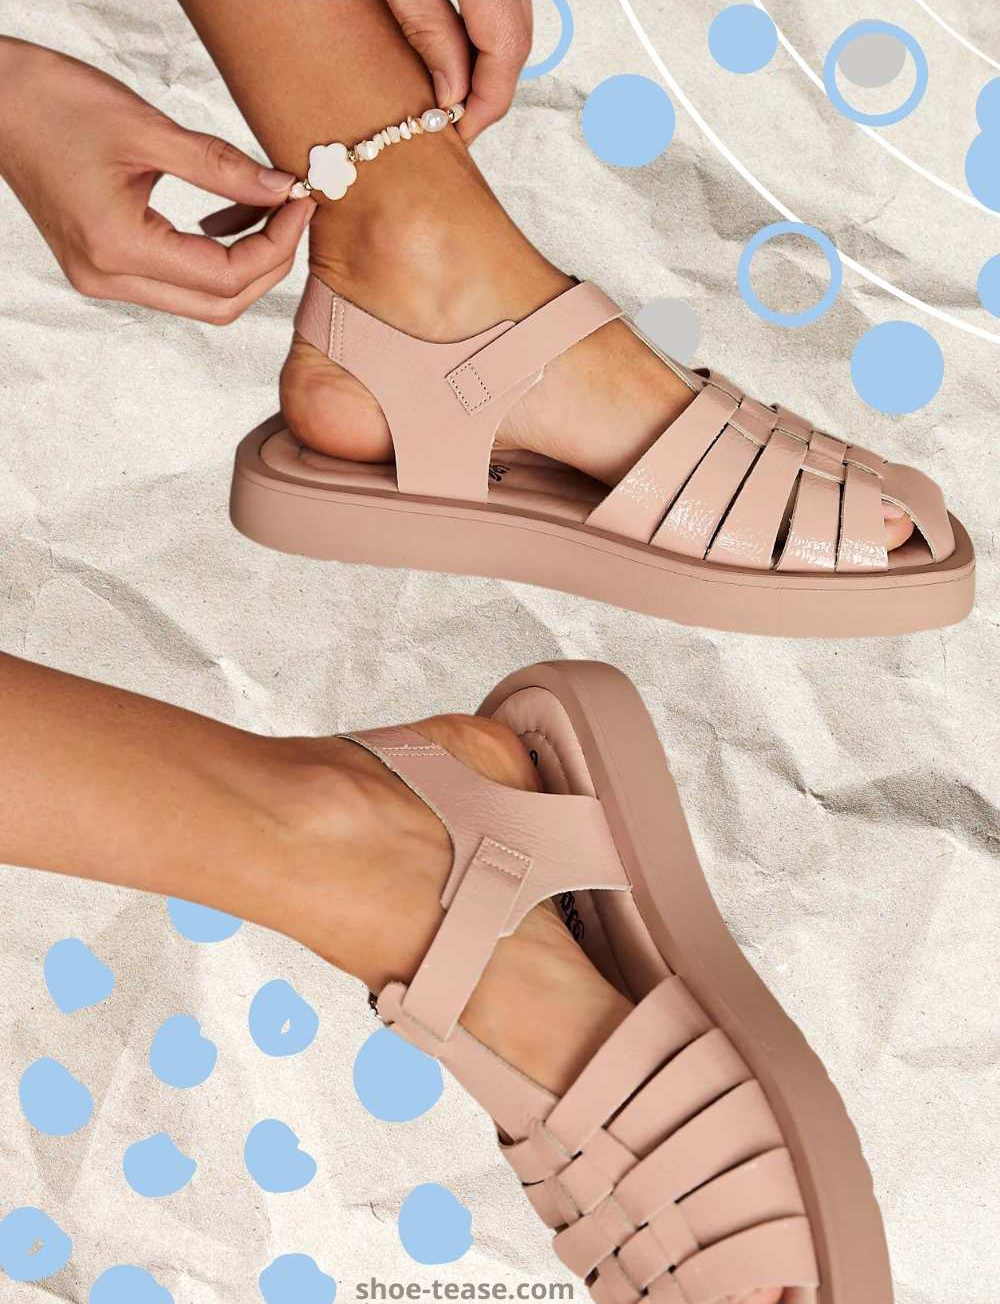 Collage of woman wearing closed toe summer shoes in blush pink and ankle bracelet over blue circles and crumpled paper background.